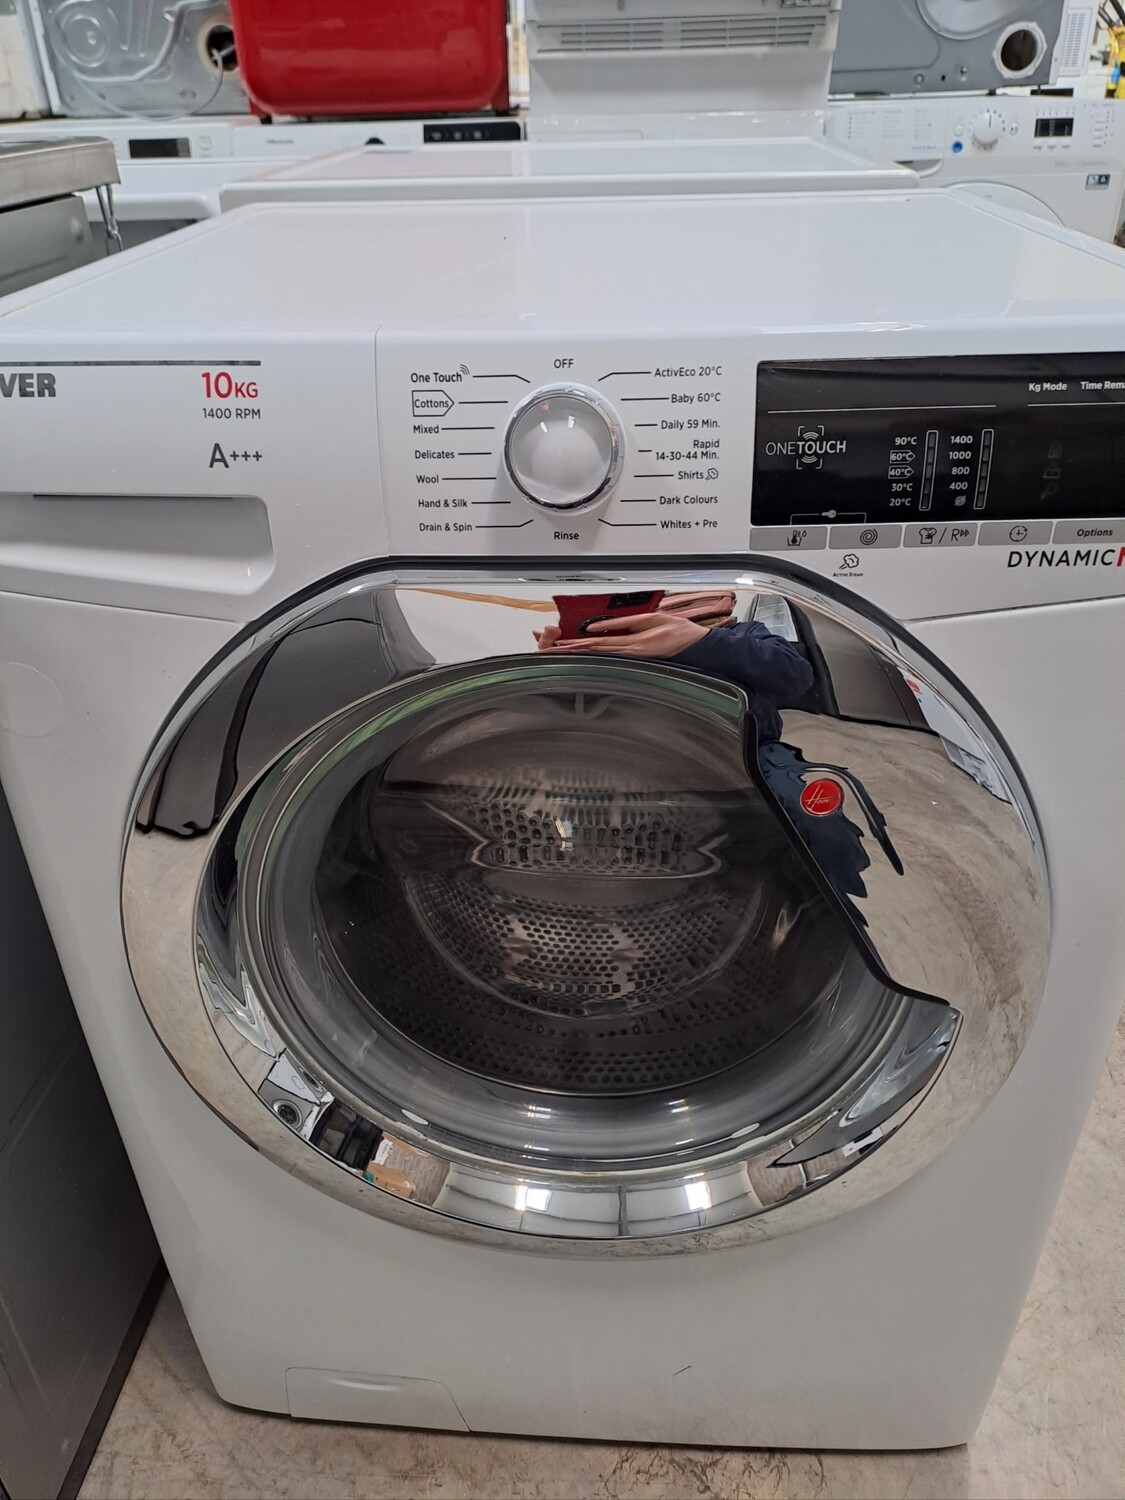 Hoover DXOA410C3/1-80 A+++ 10kg Load, 1400 Spin Washing Machine - White - Refurbished - 6 Month Guarantee